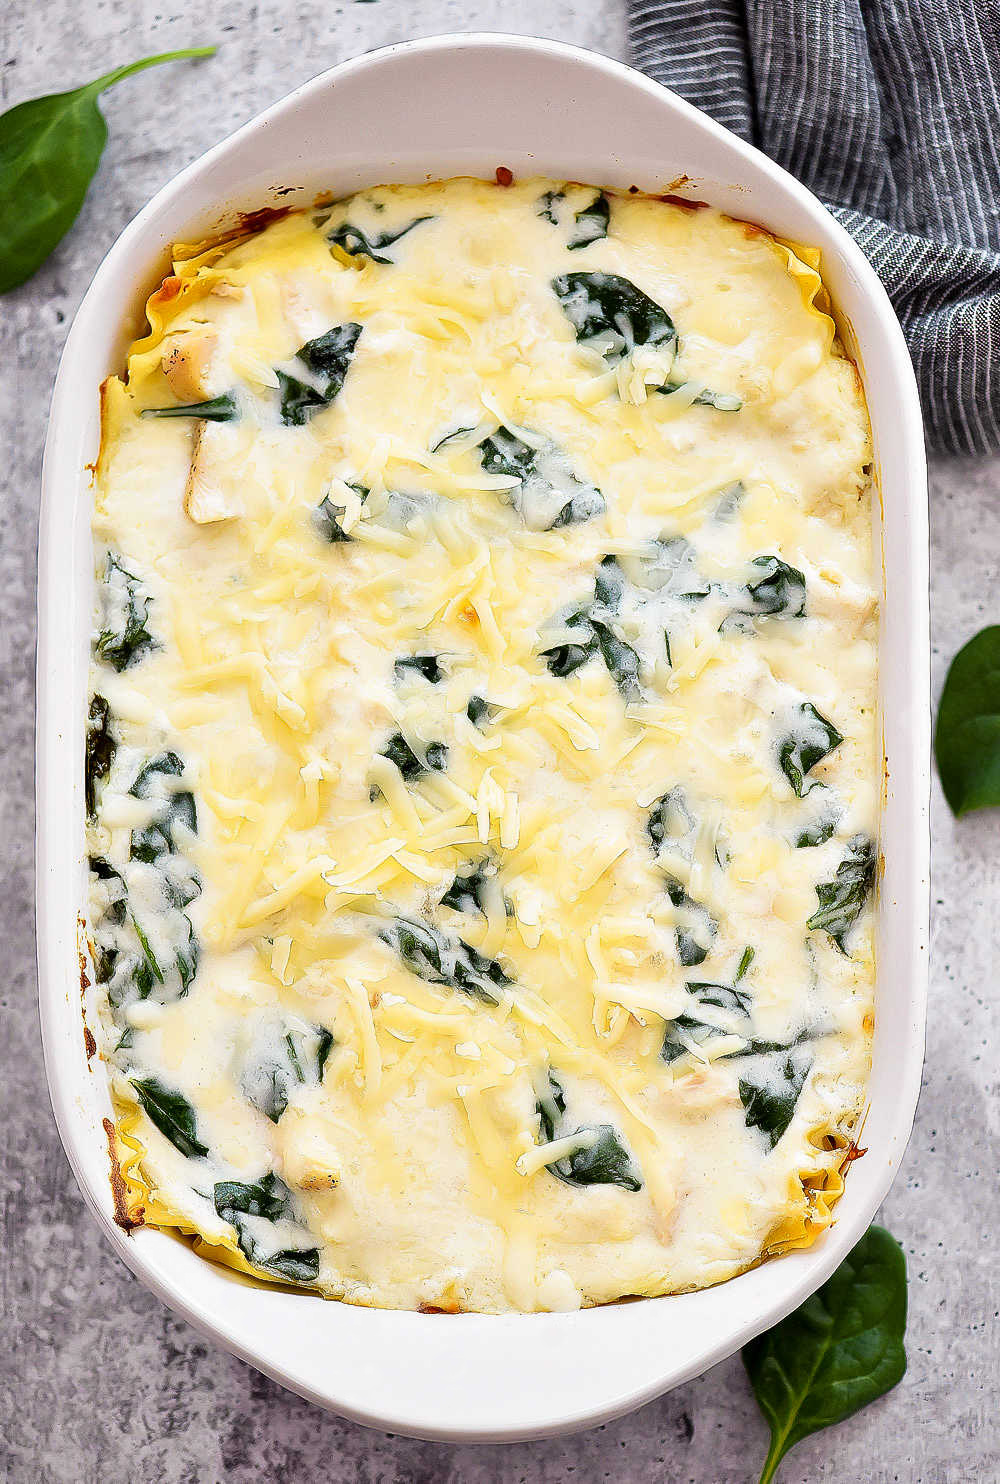 A white cheese lasagna with layers of noodles, white cheese sauce, Mozzarella cheese and spinach leaves. Life-in-the-Lofthouse.com